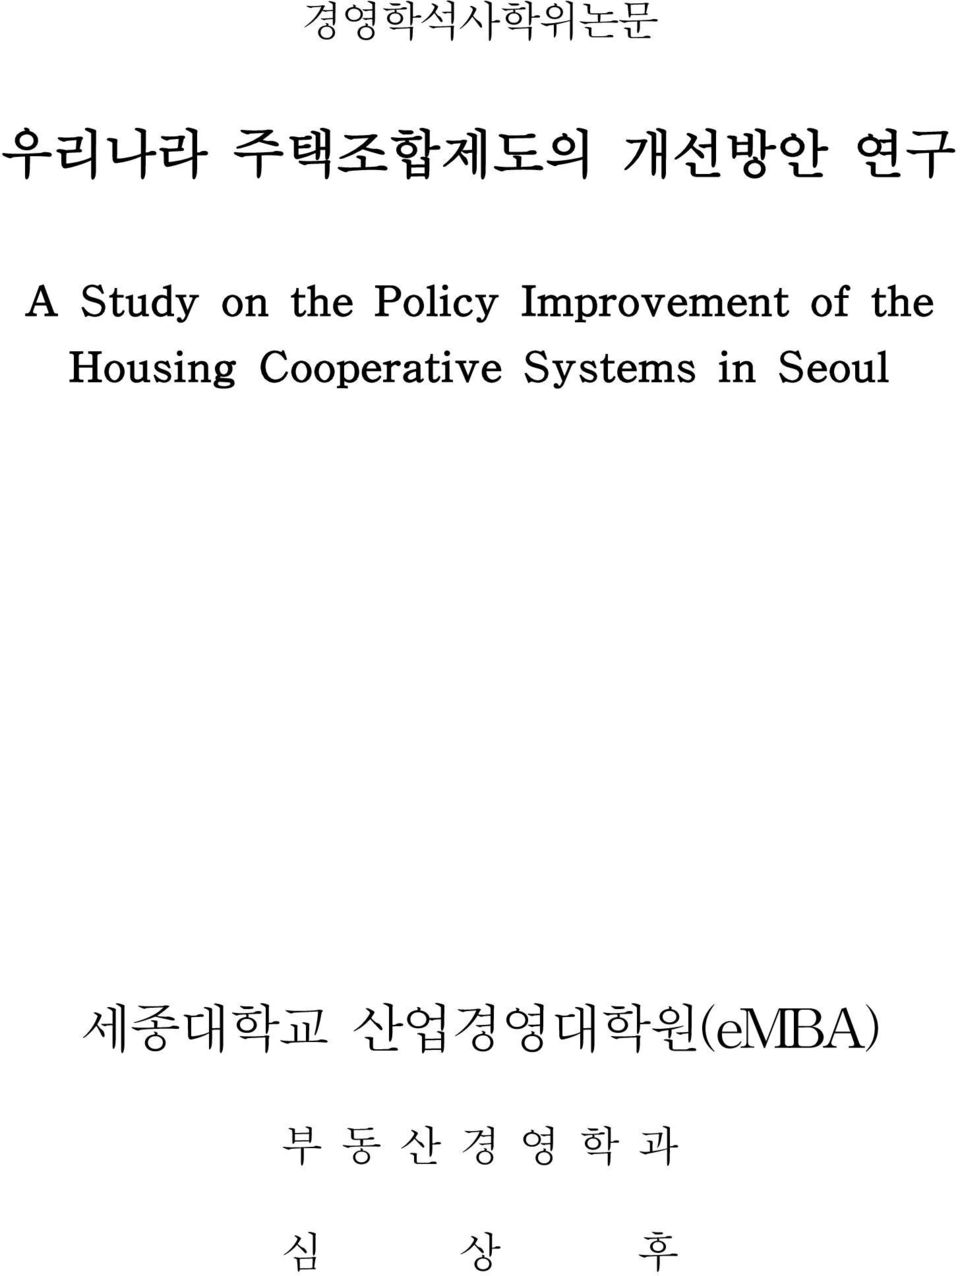 the Housing Cooperative Systems in